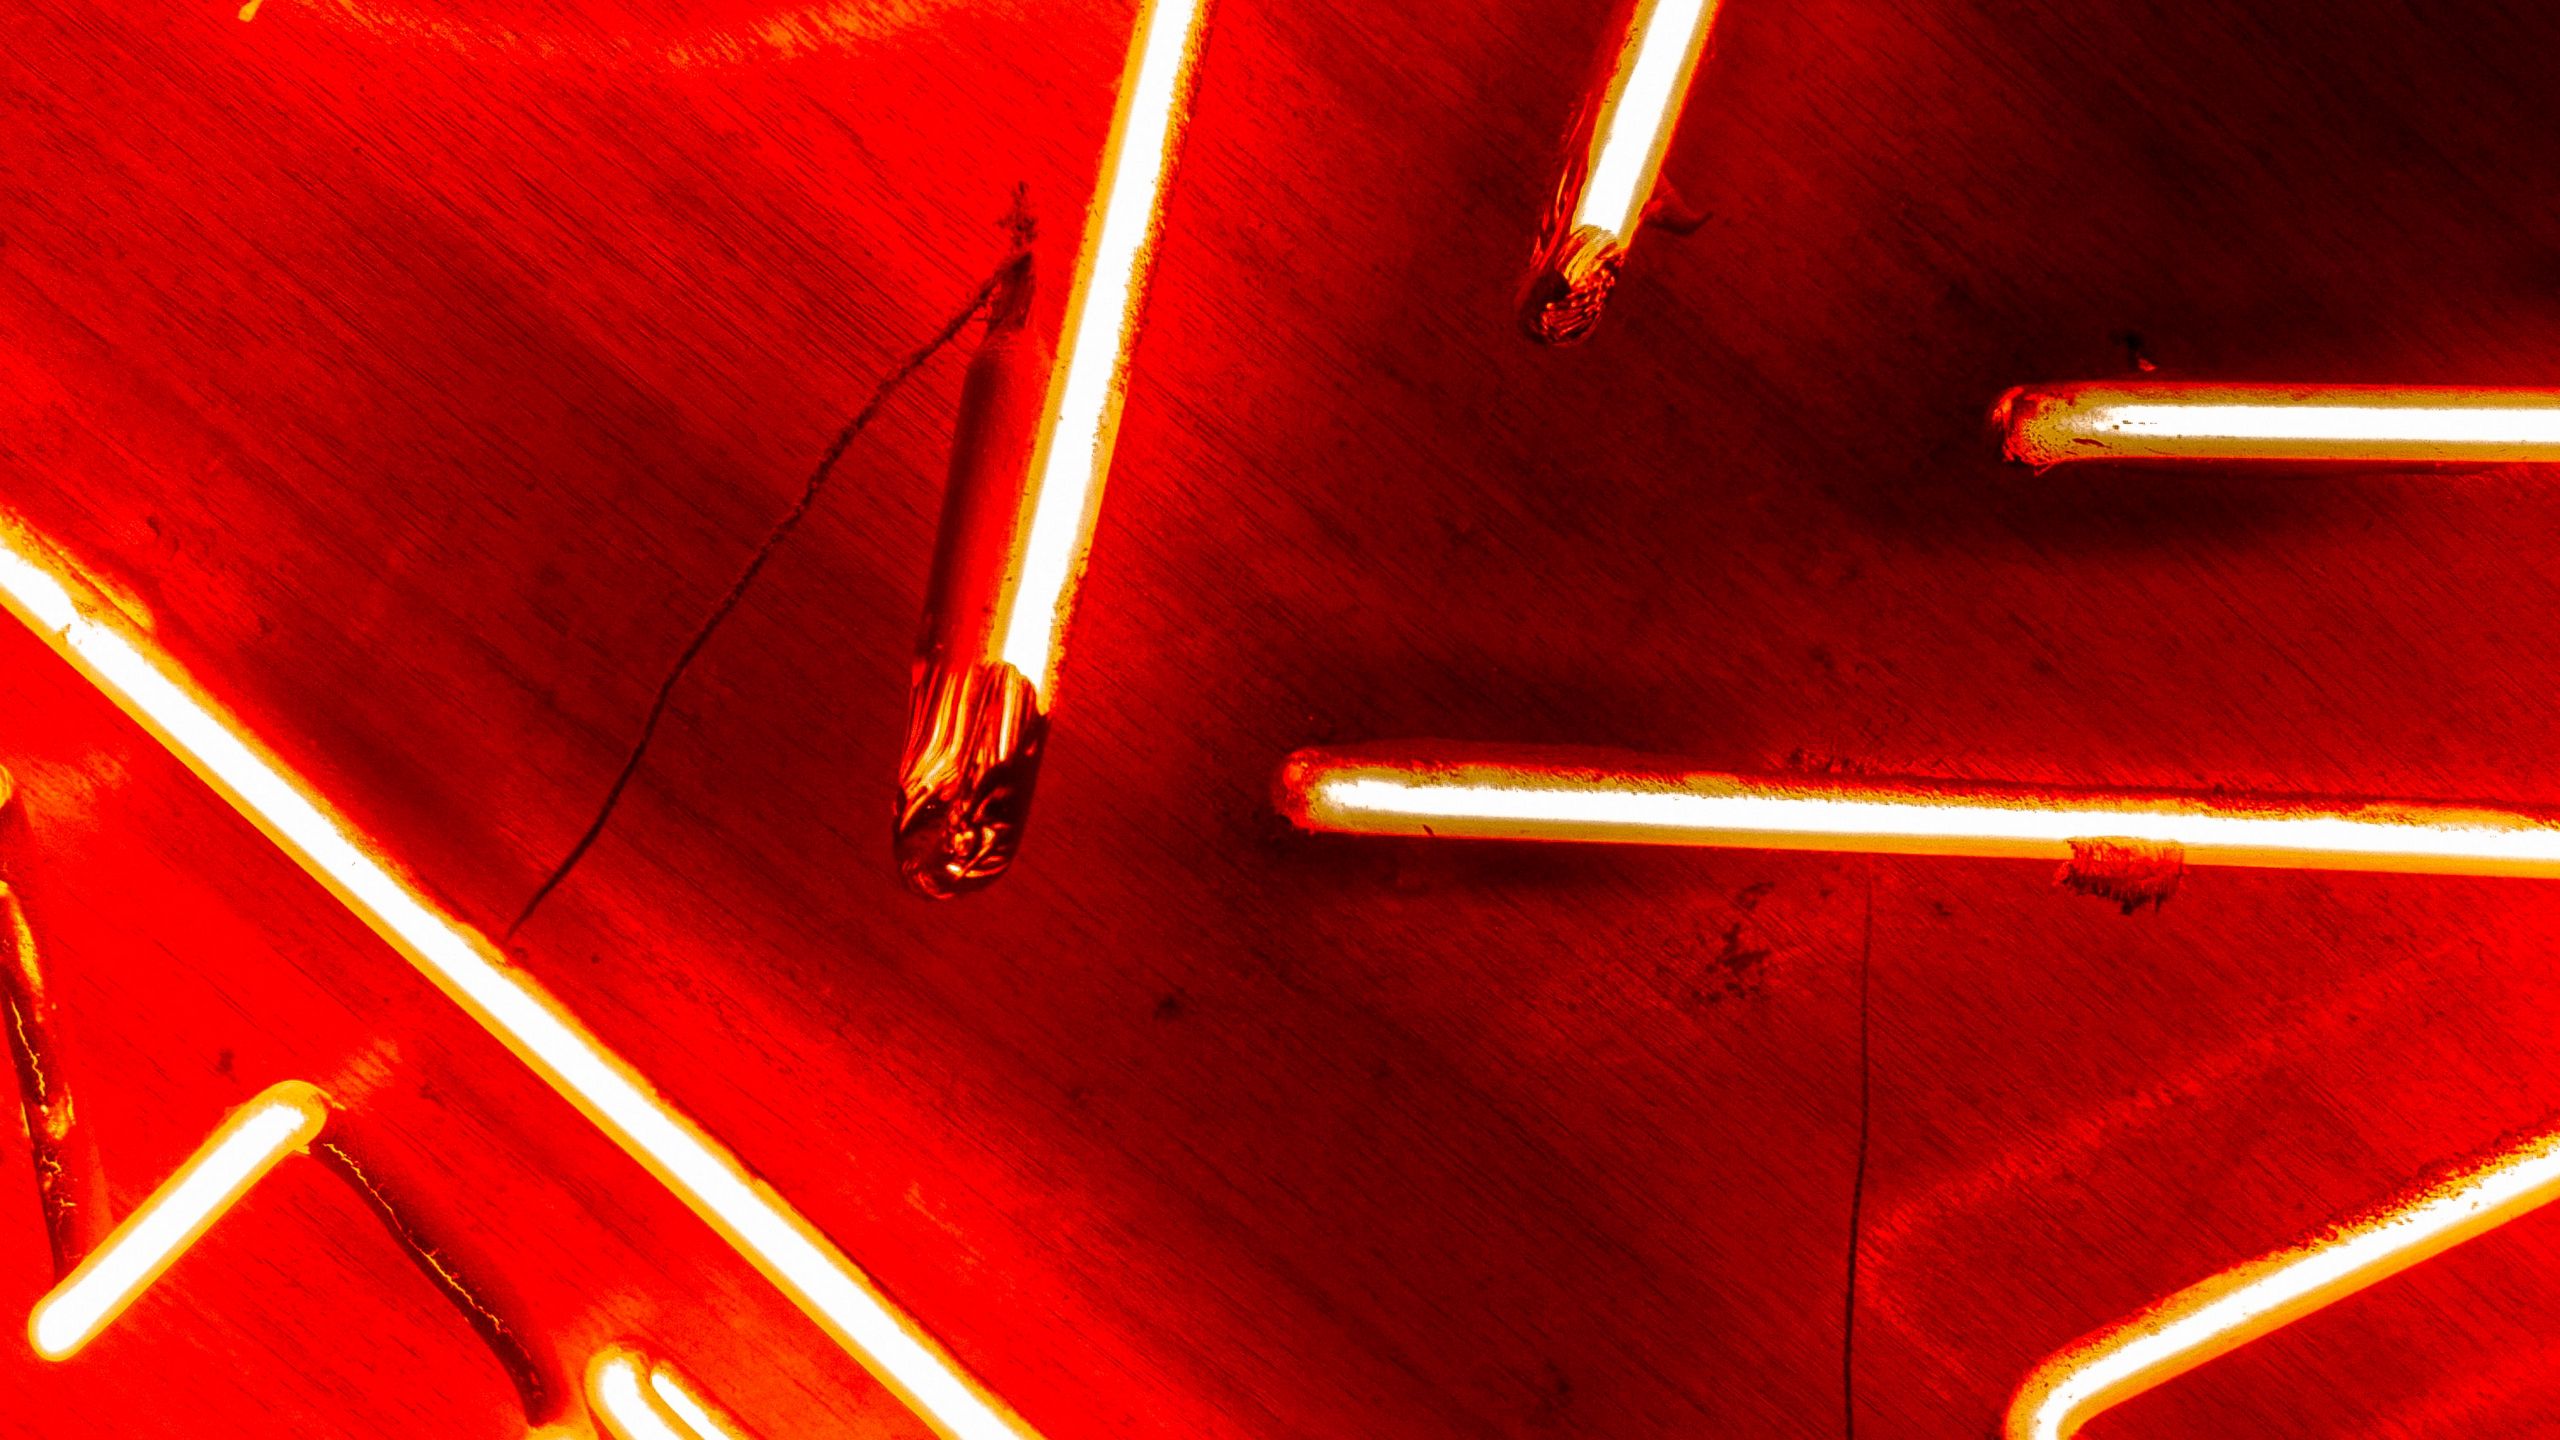 Download wallpaper 2560x1440 neon, lamps, red, glow, light widescreen 16:9 HD background